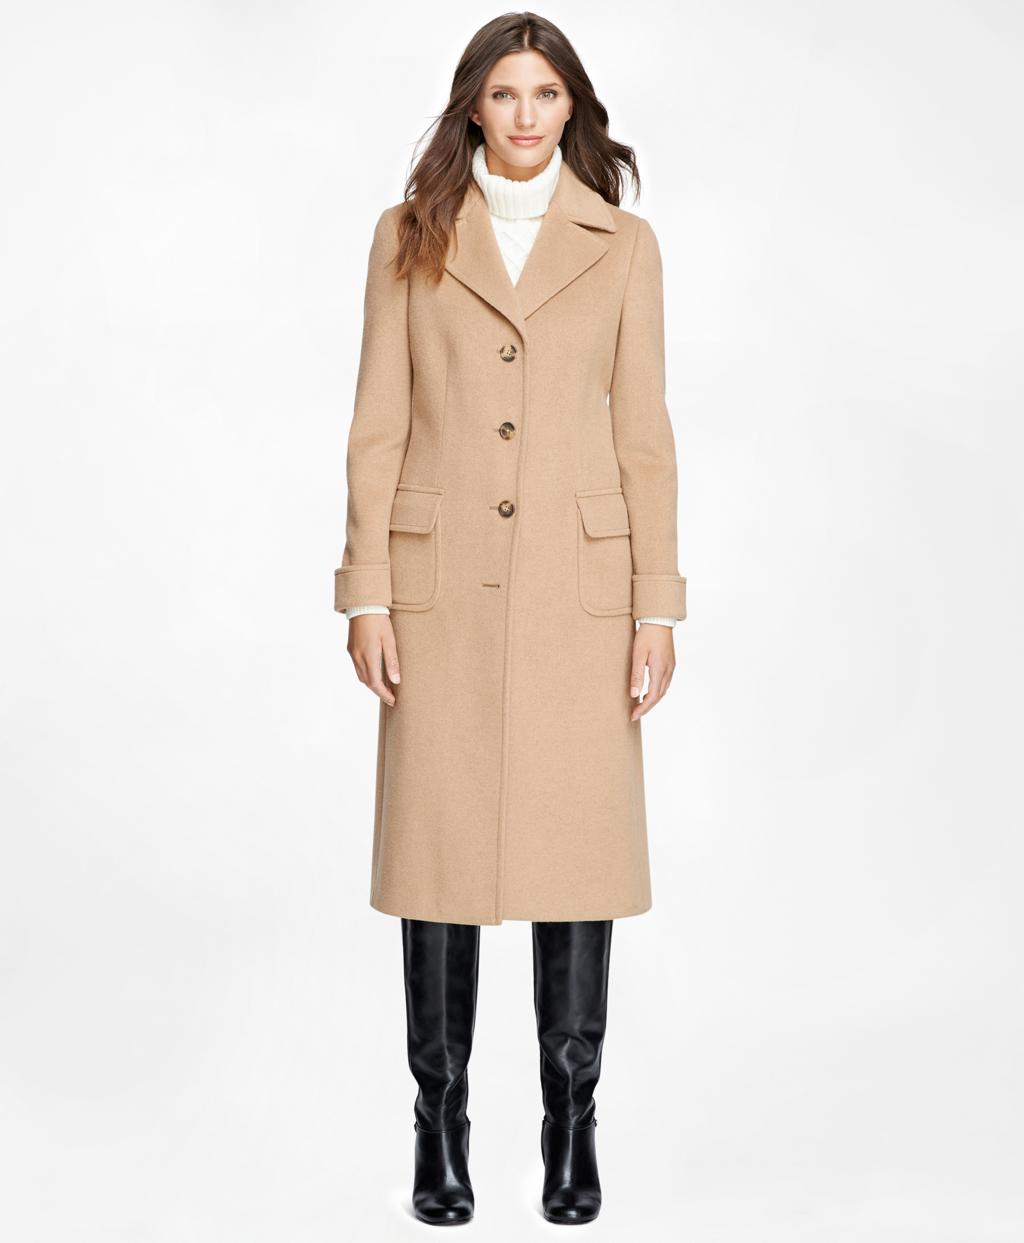 Lyst - Brooks Brothers Camel Hair Polo Coat in Brown